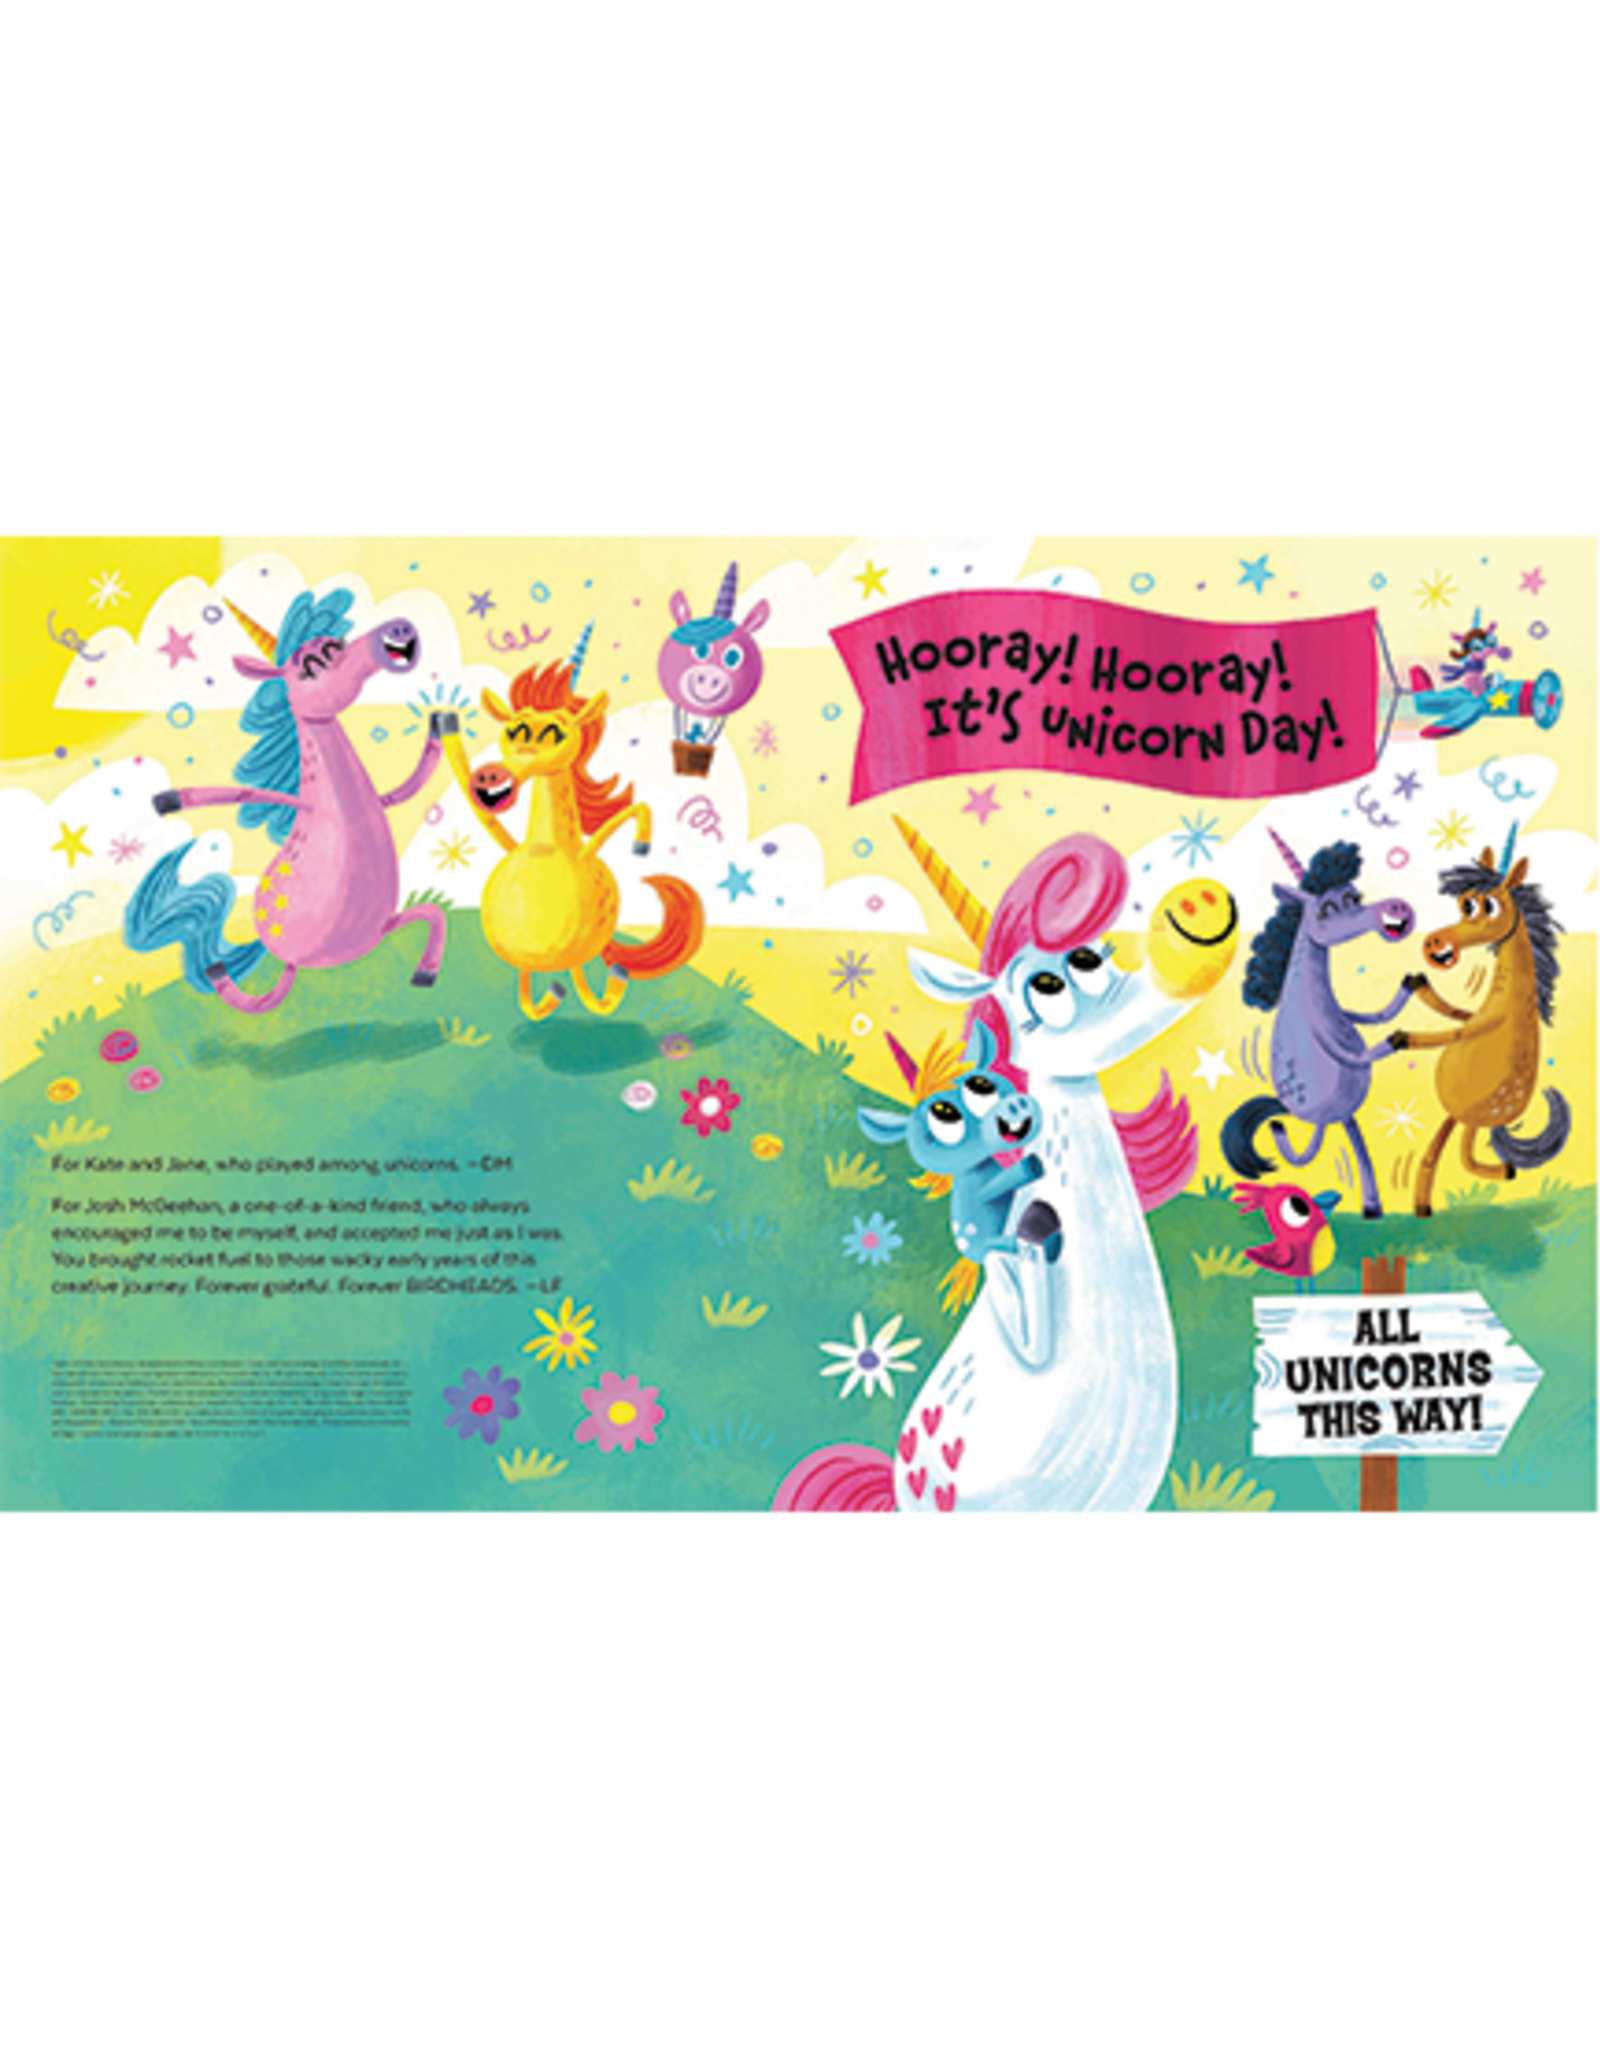 Unicorn Day: A Magical Kindness Book for Children